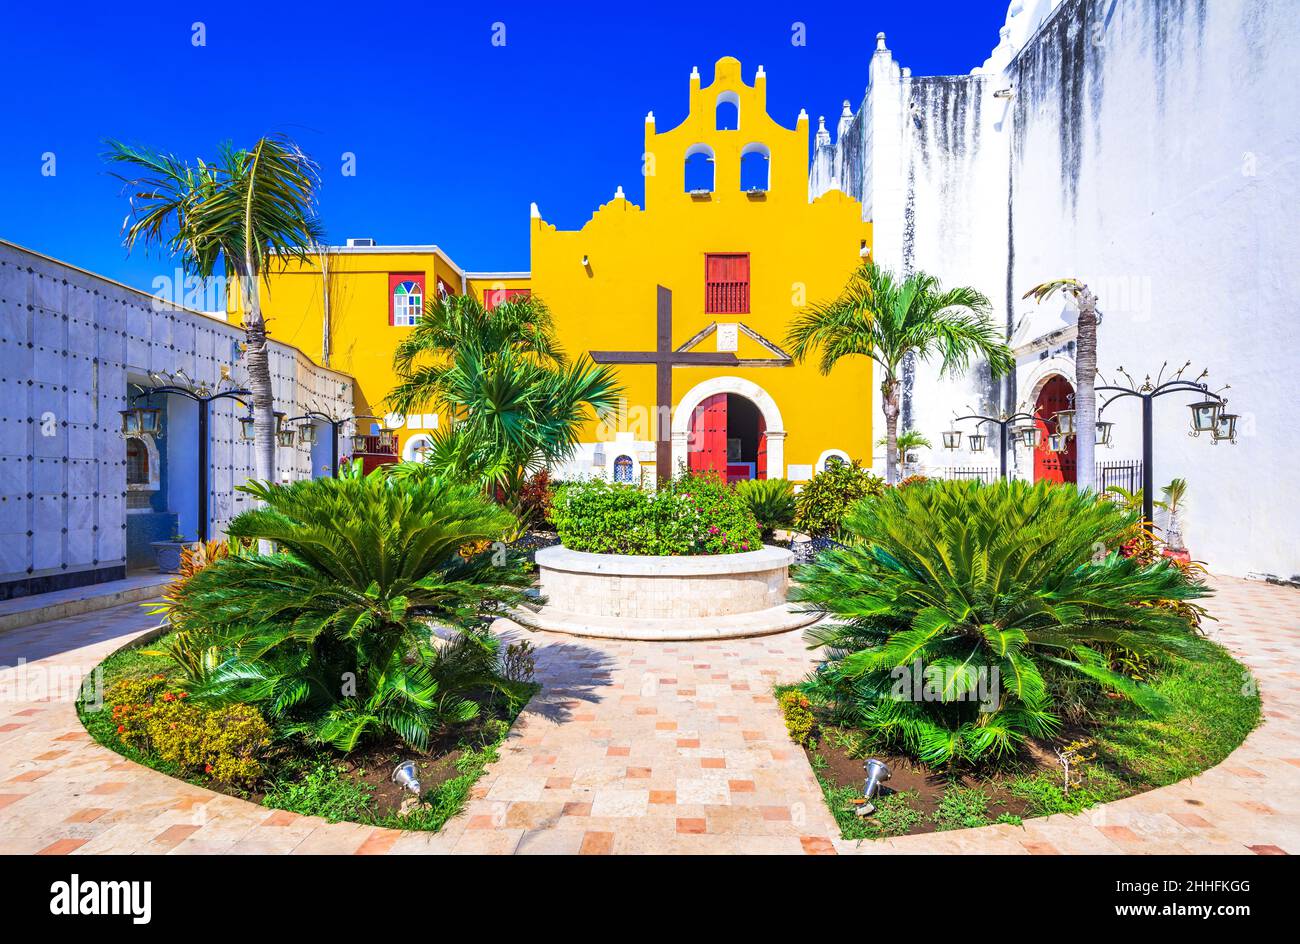 Campeche, Mexico - Yucatan colonial heritage, cathedral of San Francisco de Campeche, built in 1540. Stock Photo